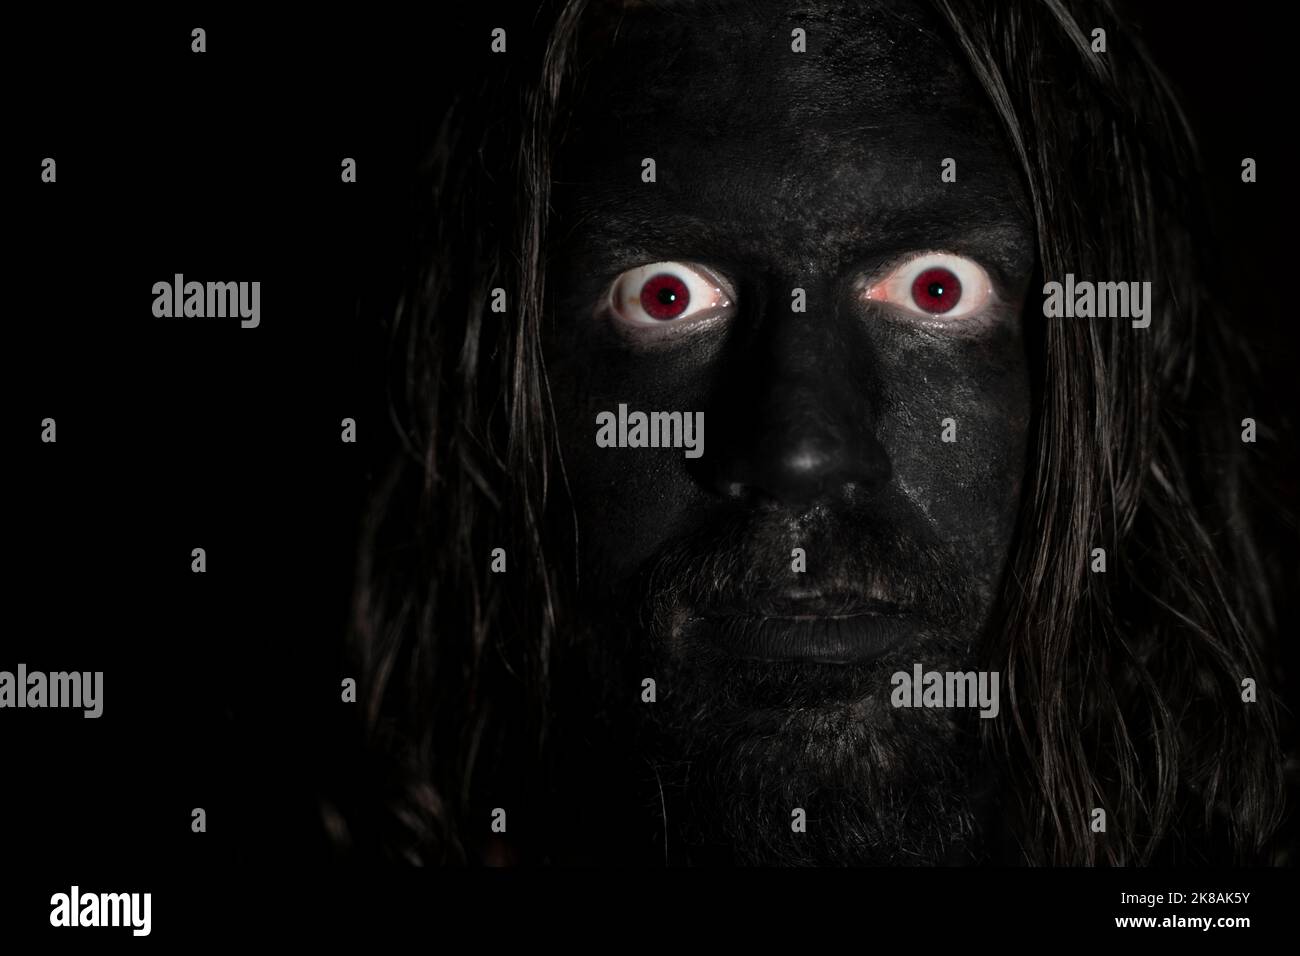 A scary face of a man in the dark. Long hair, black face and red eyes. Low light with dark background. Horror concept. Stock Photo